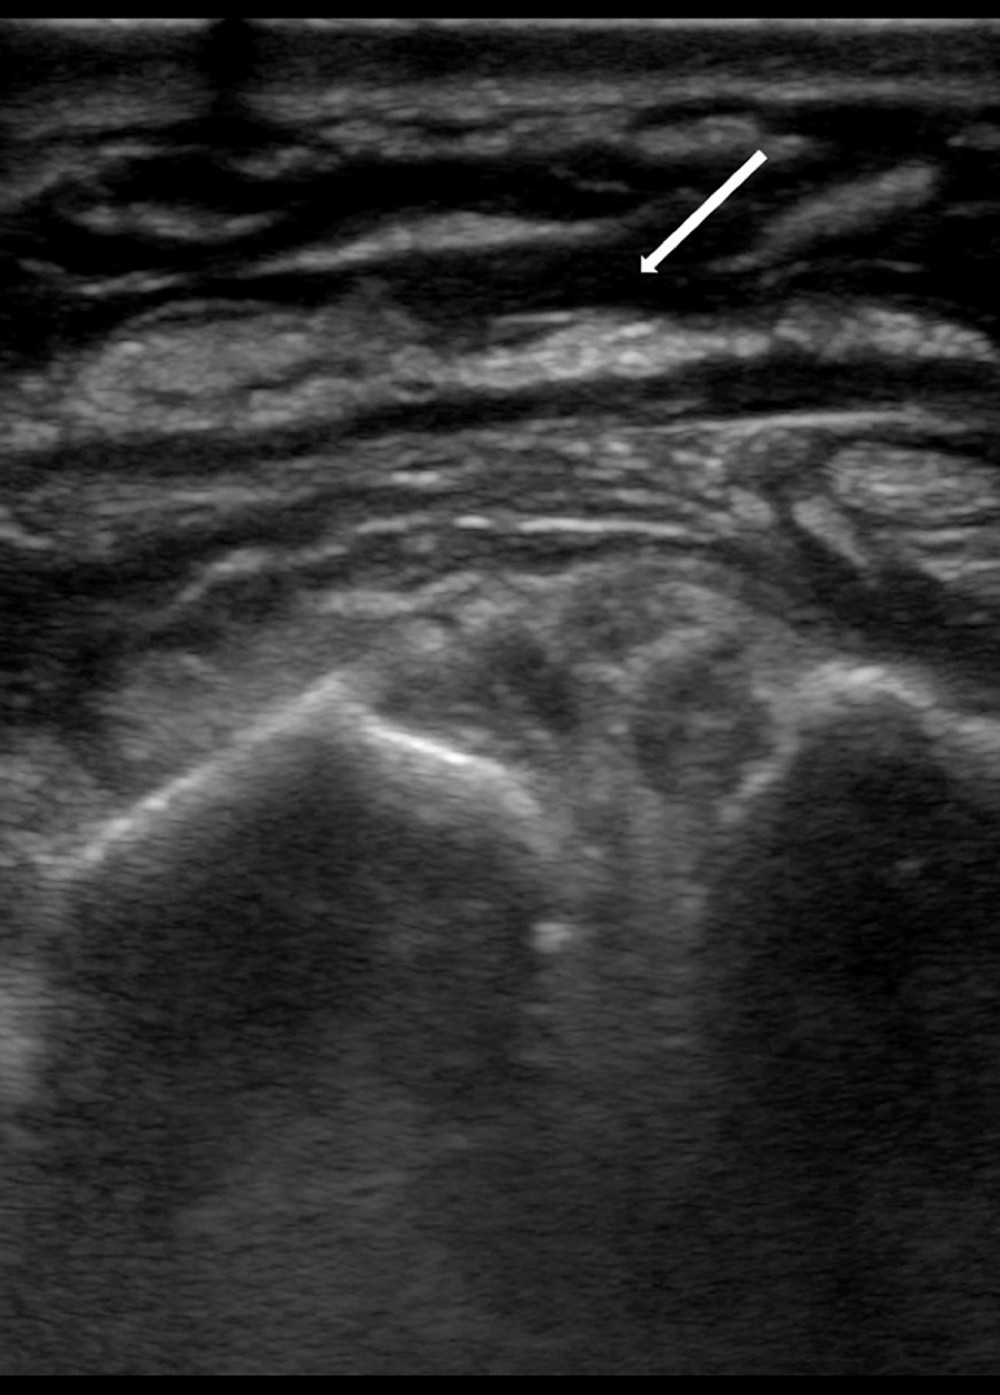 Diffuse interstitial edema of the right arm soft tissue shown on bedside ultrasound in the Emergency Department (arrow).